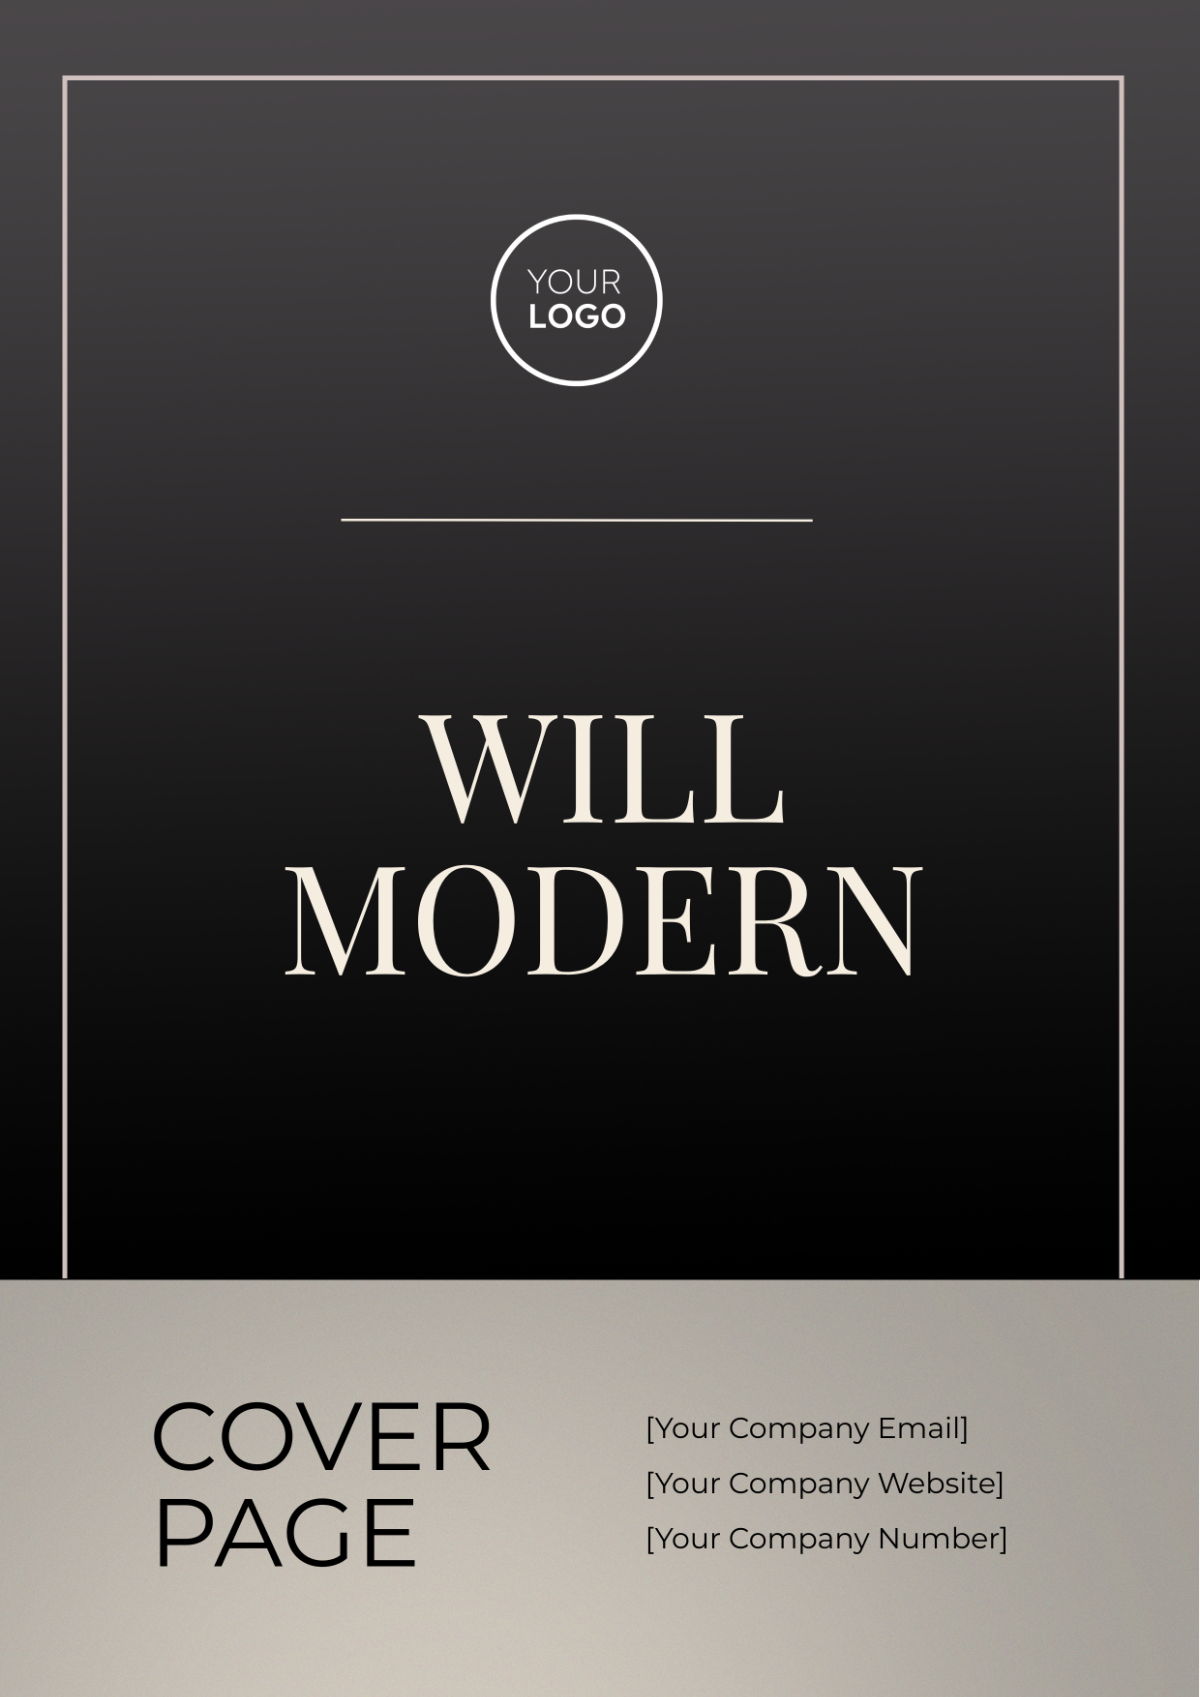 Will Modern Cover Page